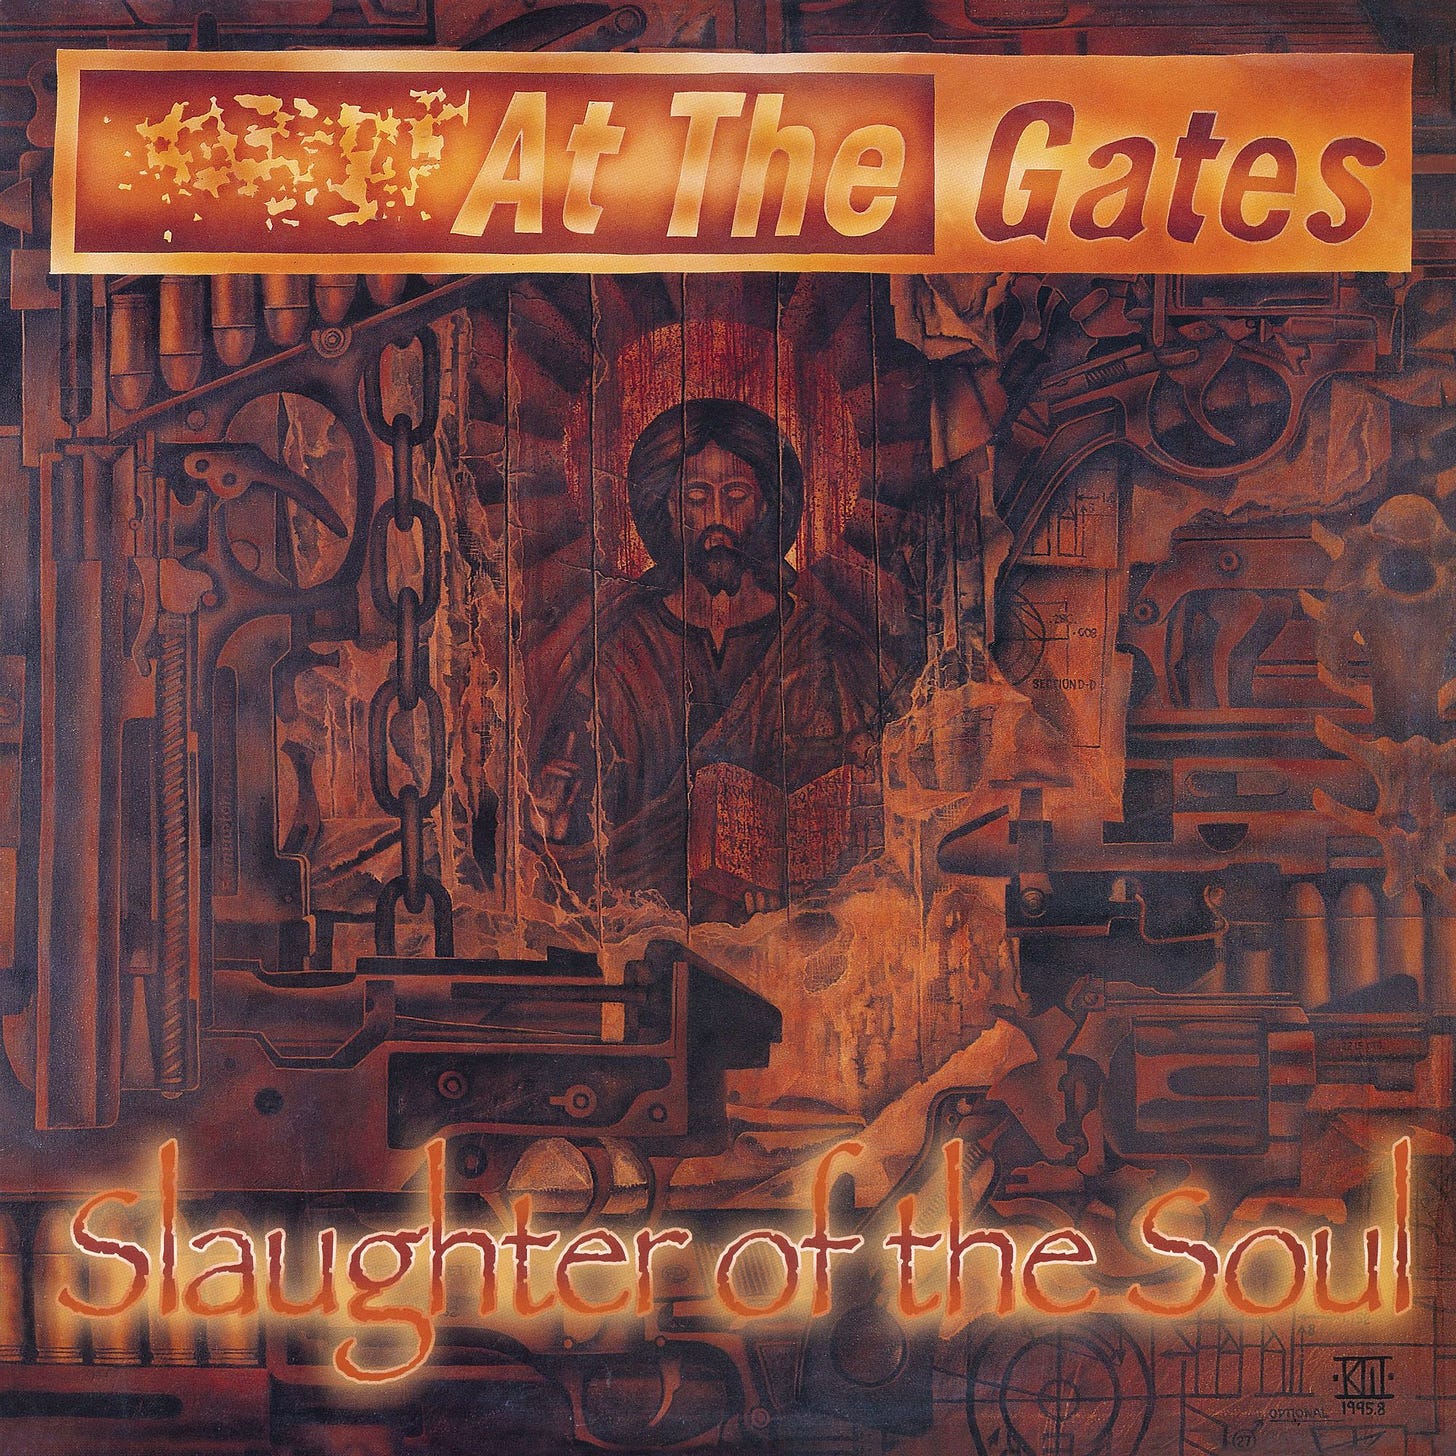 At the Gates - "Slaughter of the Soul" - Decibel Magazine